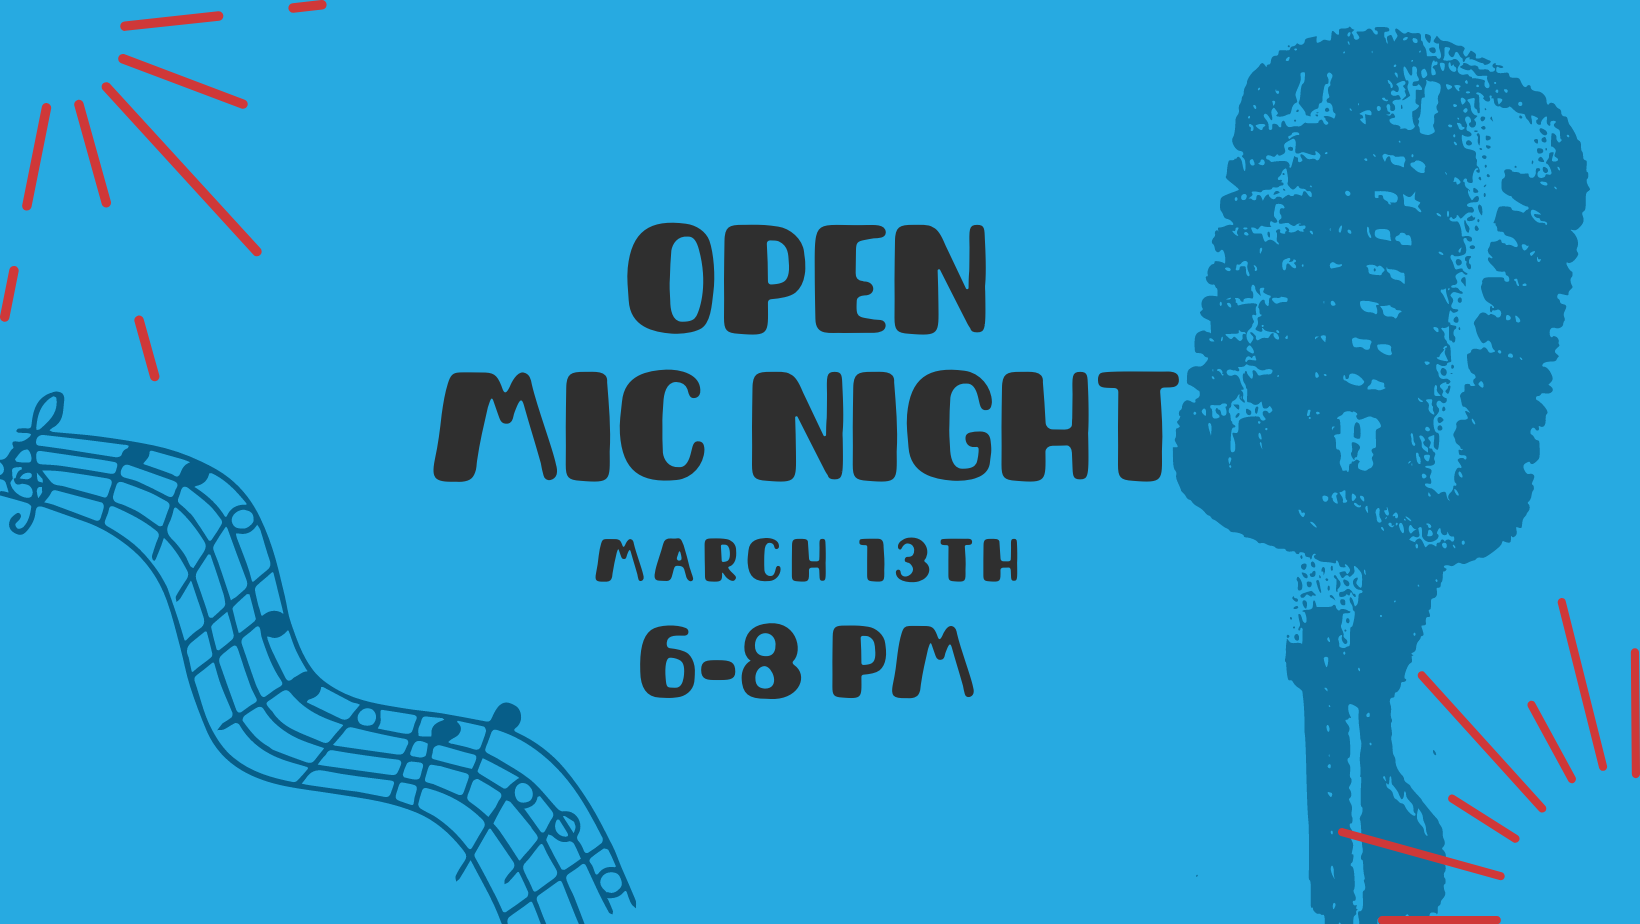 Open Mic Night March 13th from 6 to 8 pm